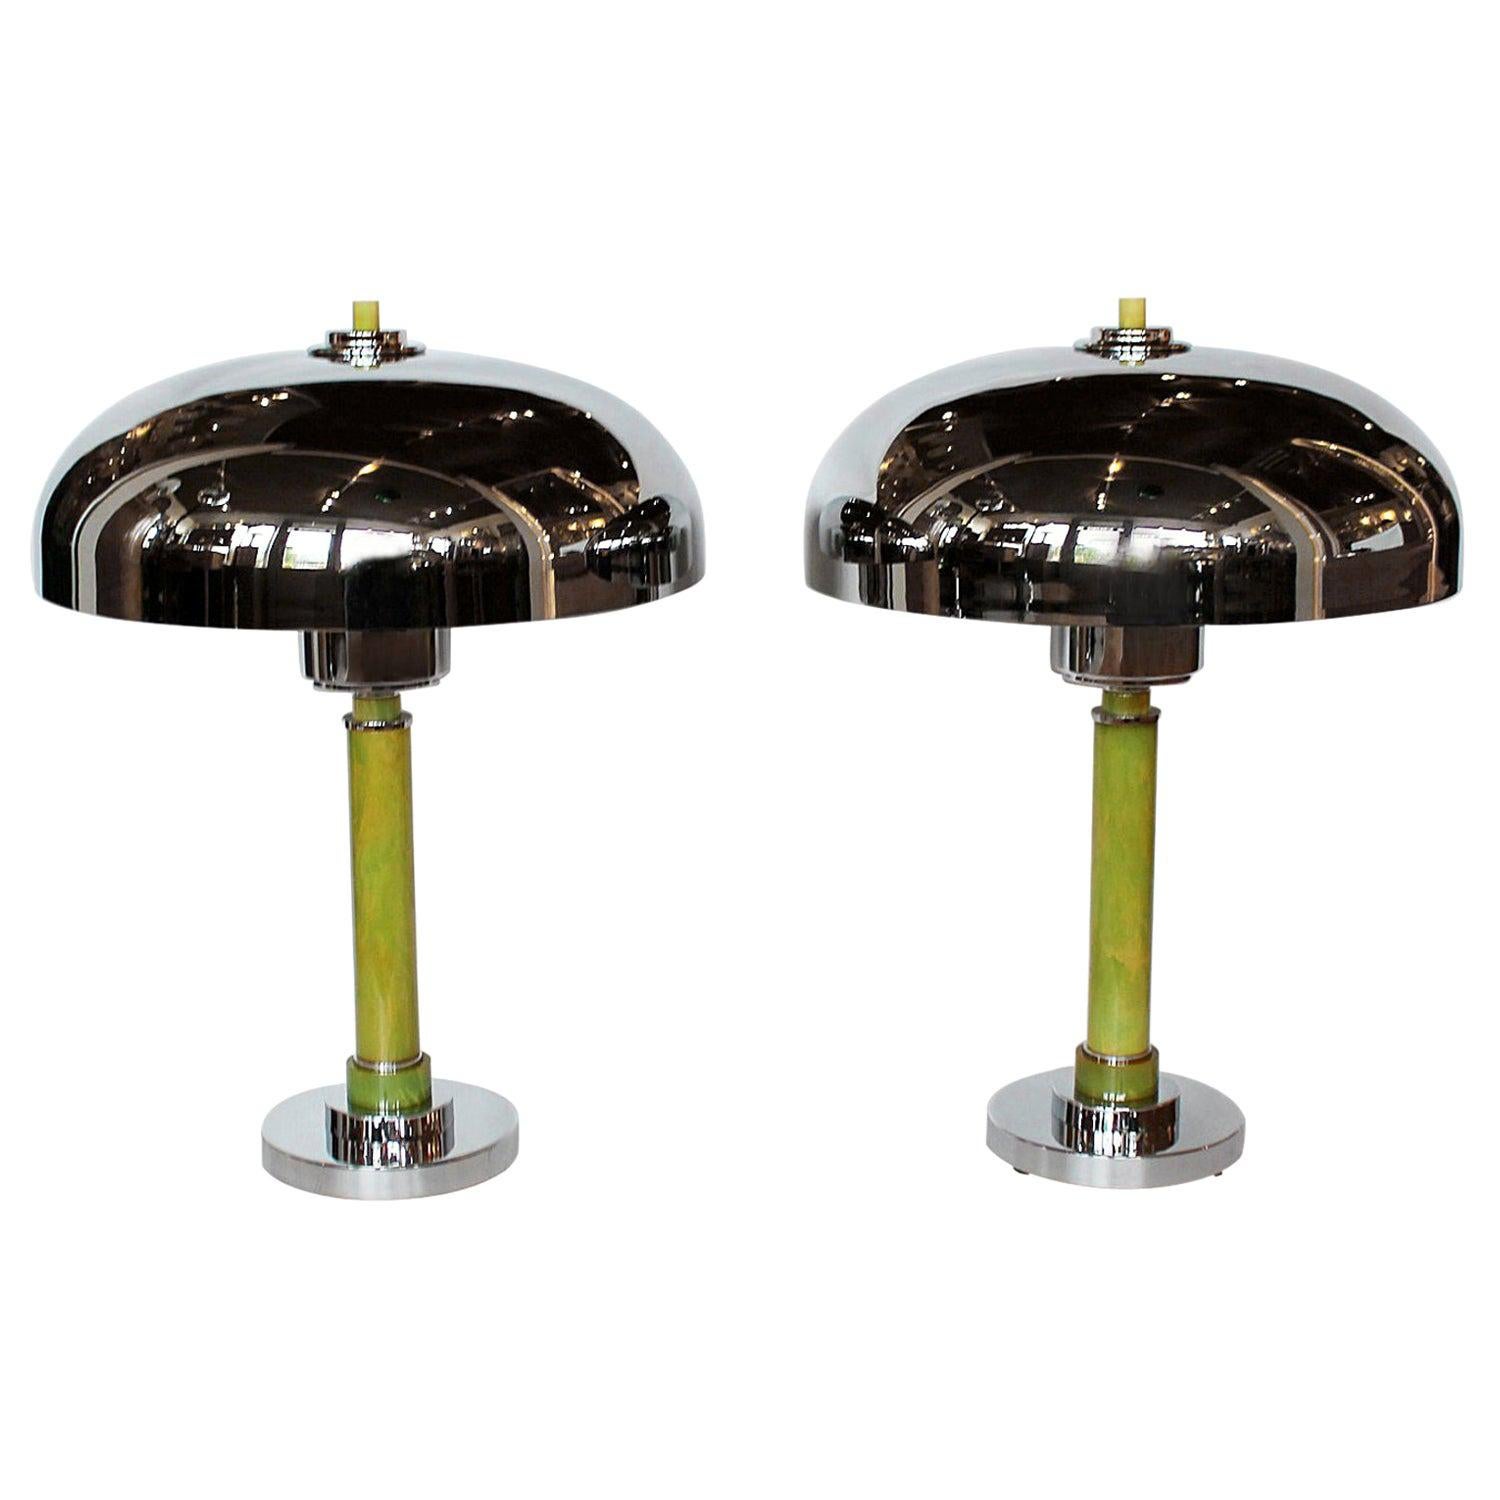 Pair of Art Deco Chrome and Bakelite Dome Lamps Some Replacement Parts